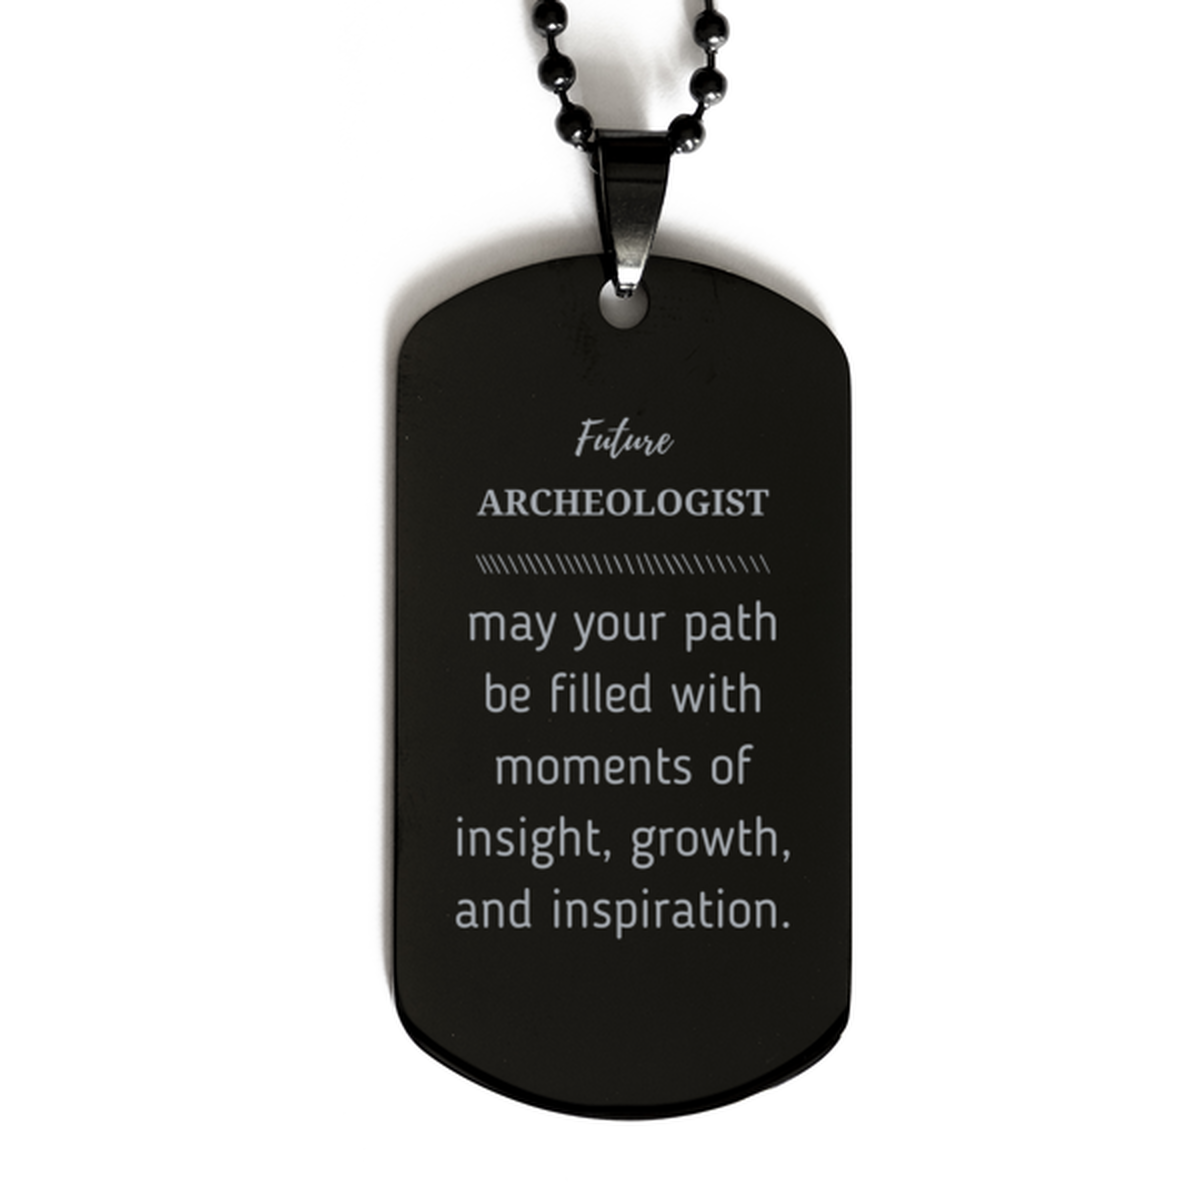 Future Archeologist Gifts, May your path be filled with moments of insight, Graduation Gifts for New Archeologist, Christmas Unique Black Dog Tag For Men, Women, Friends